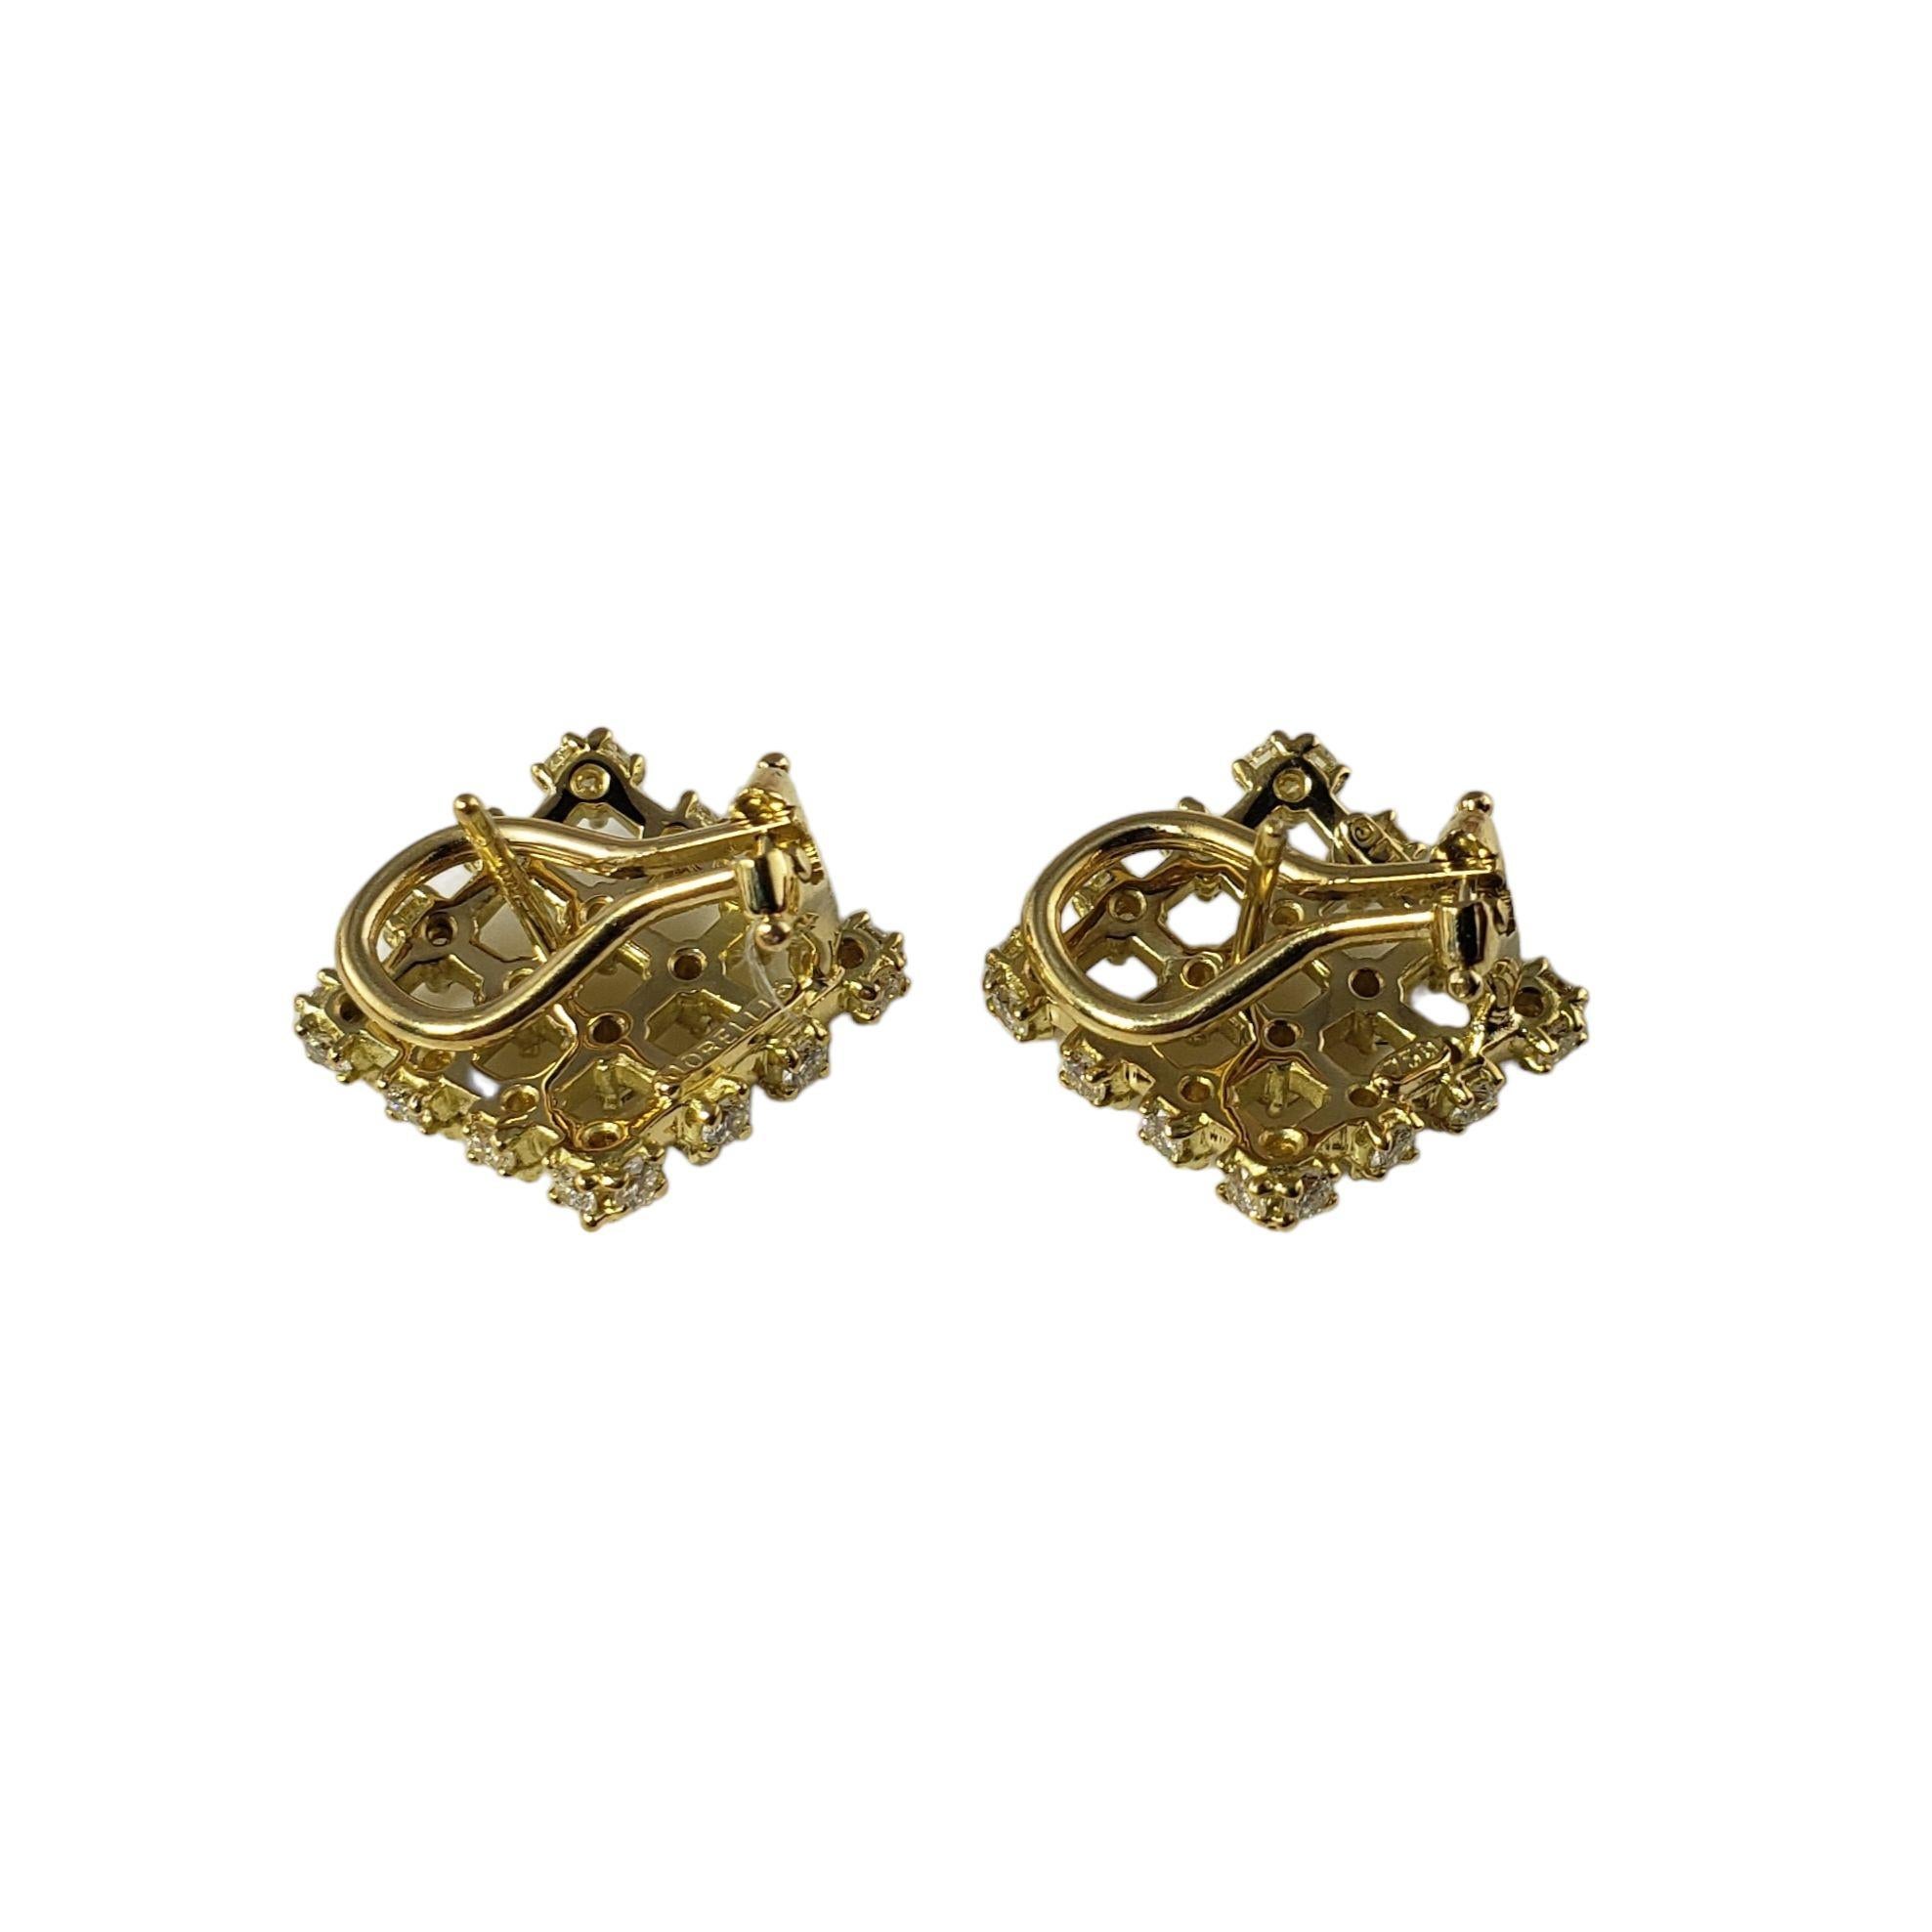 Round Cut Paul Morelli 18 Karat Yellow Gold and Diamond Earrings For Sale